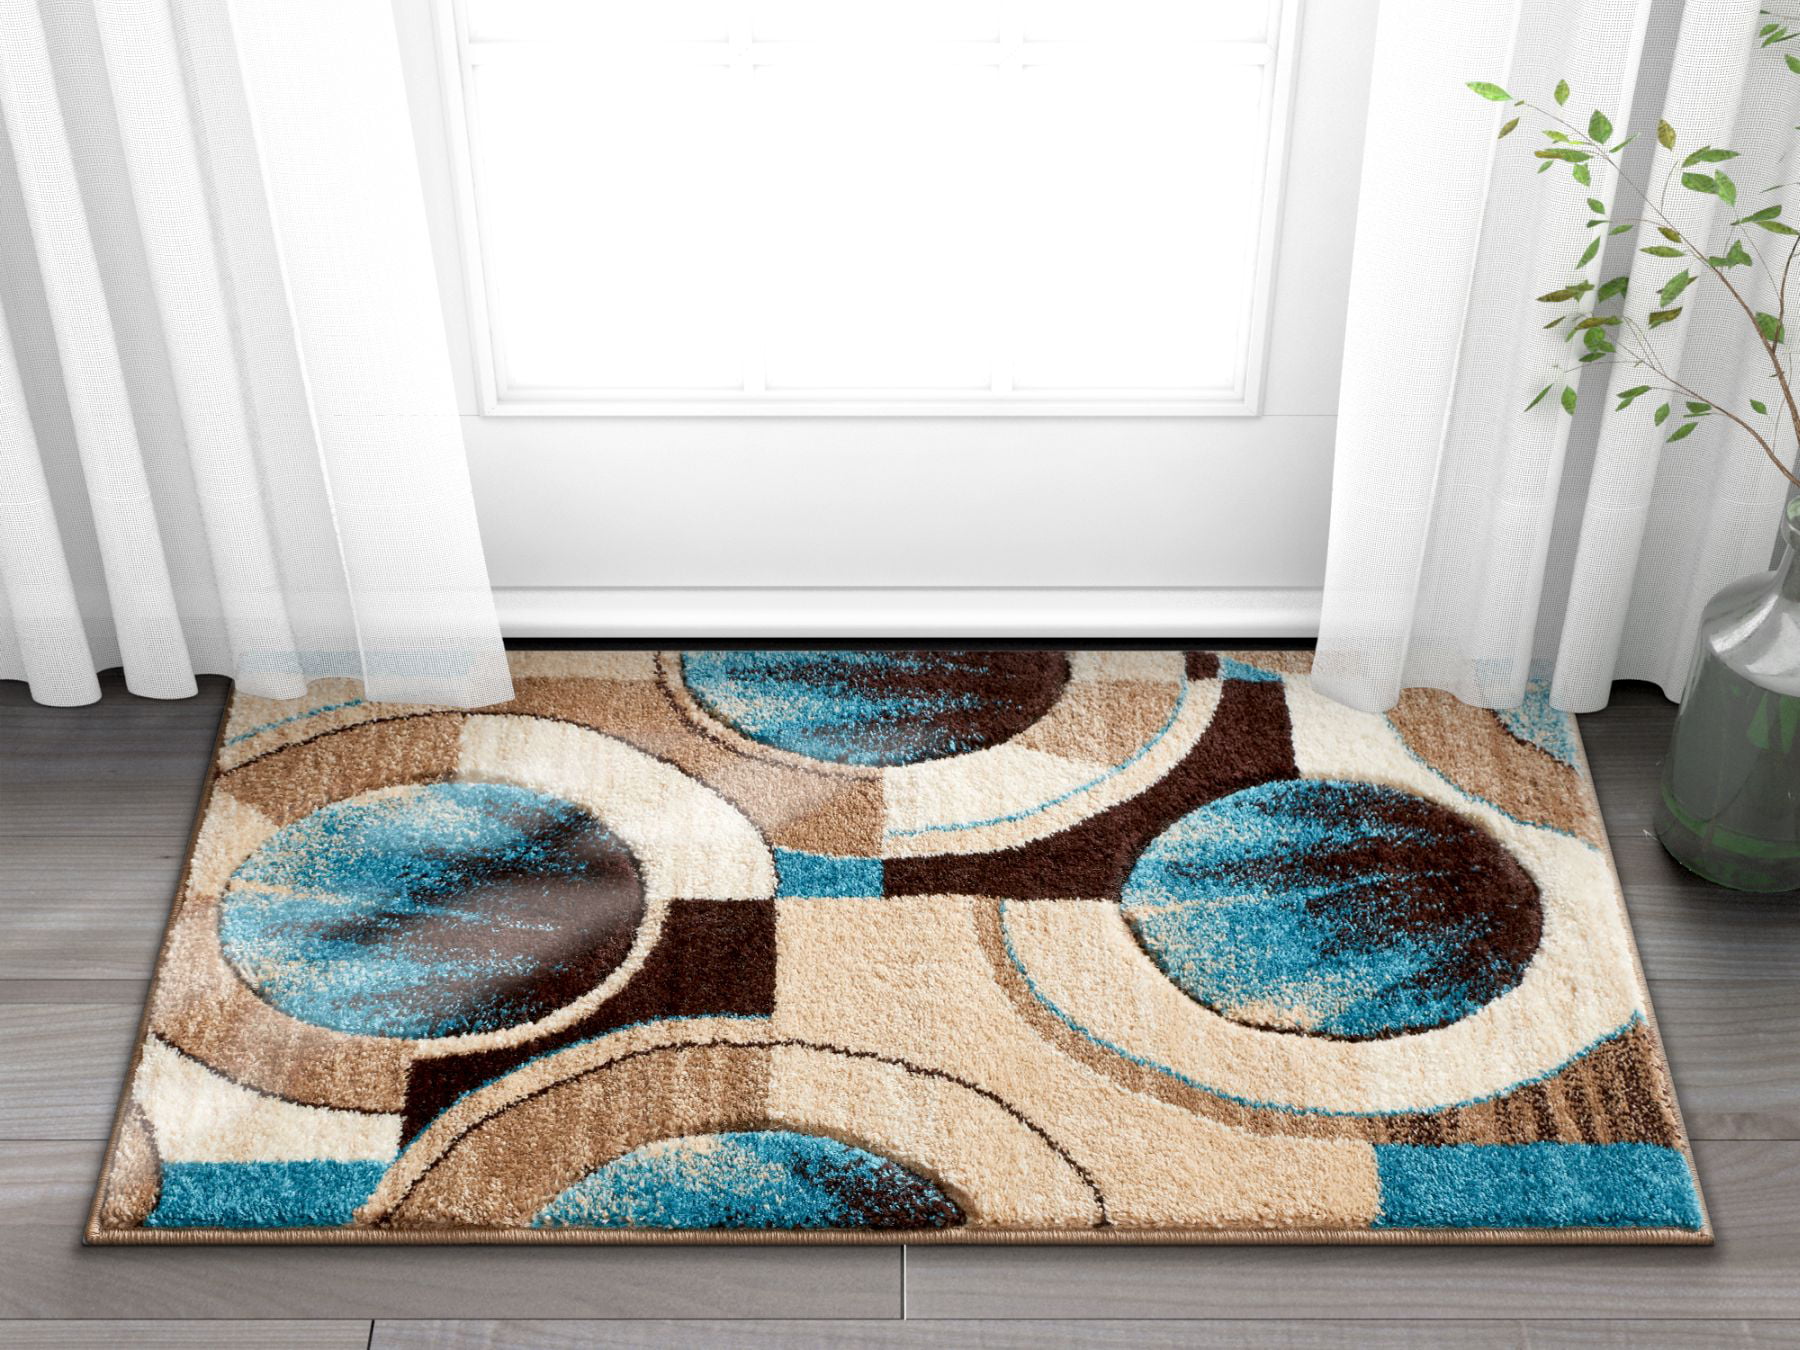 Well Woven Sunburst Blue Beige Brown, Brown And Beige Area Rugs